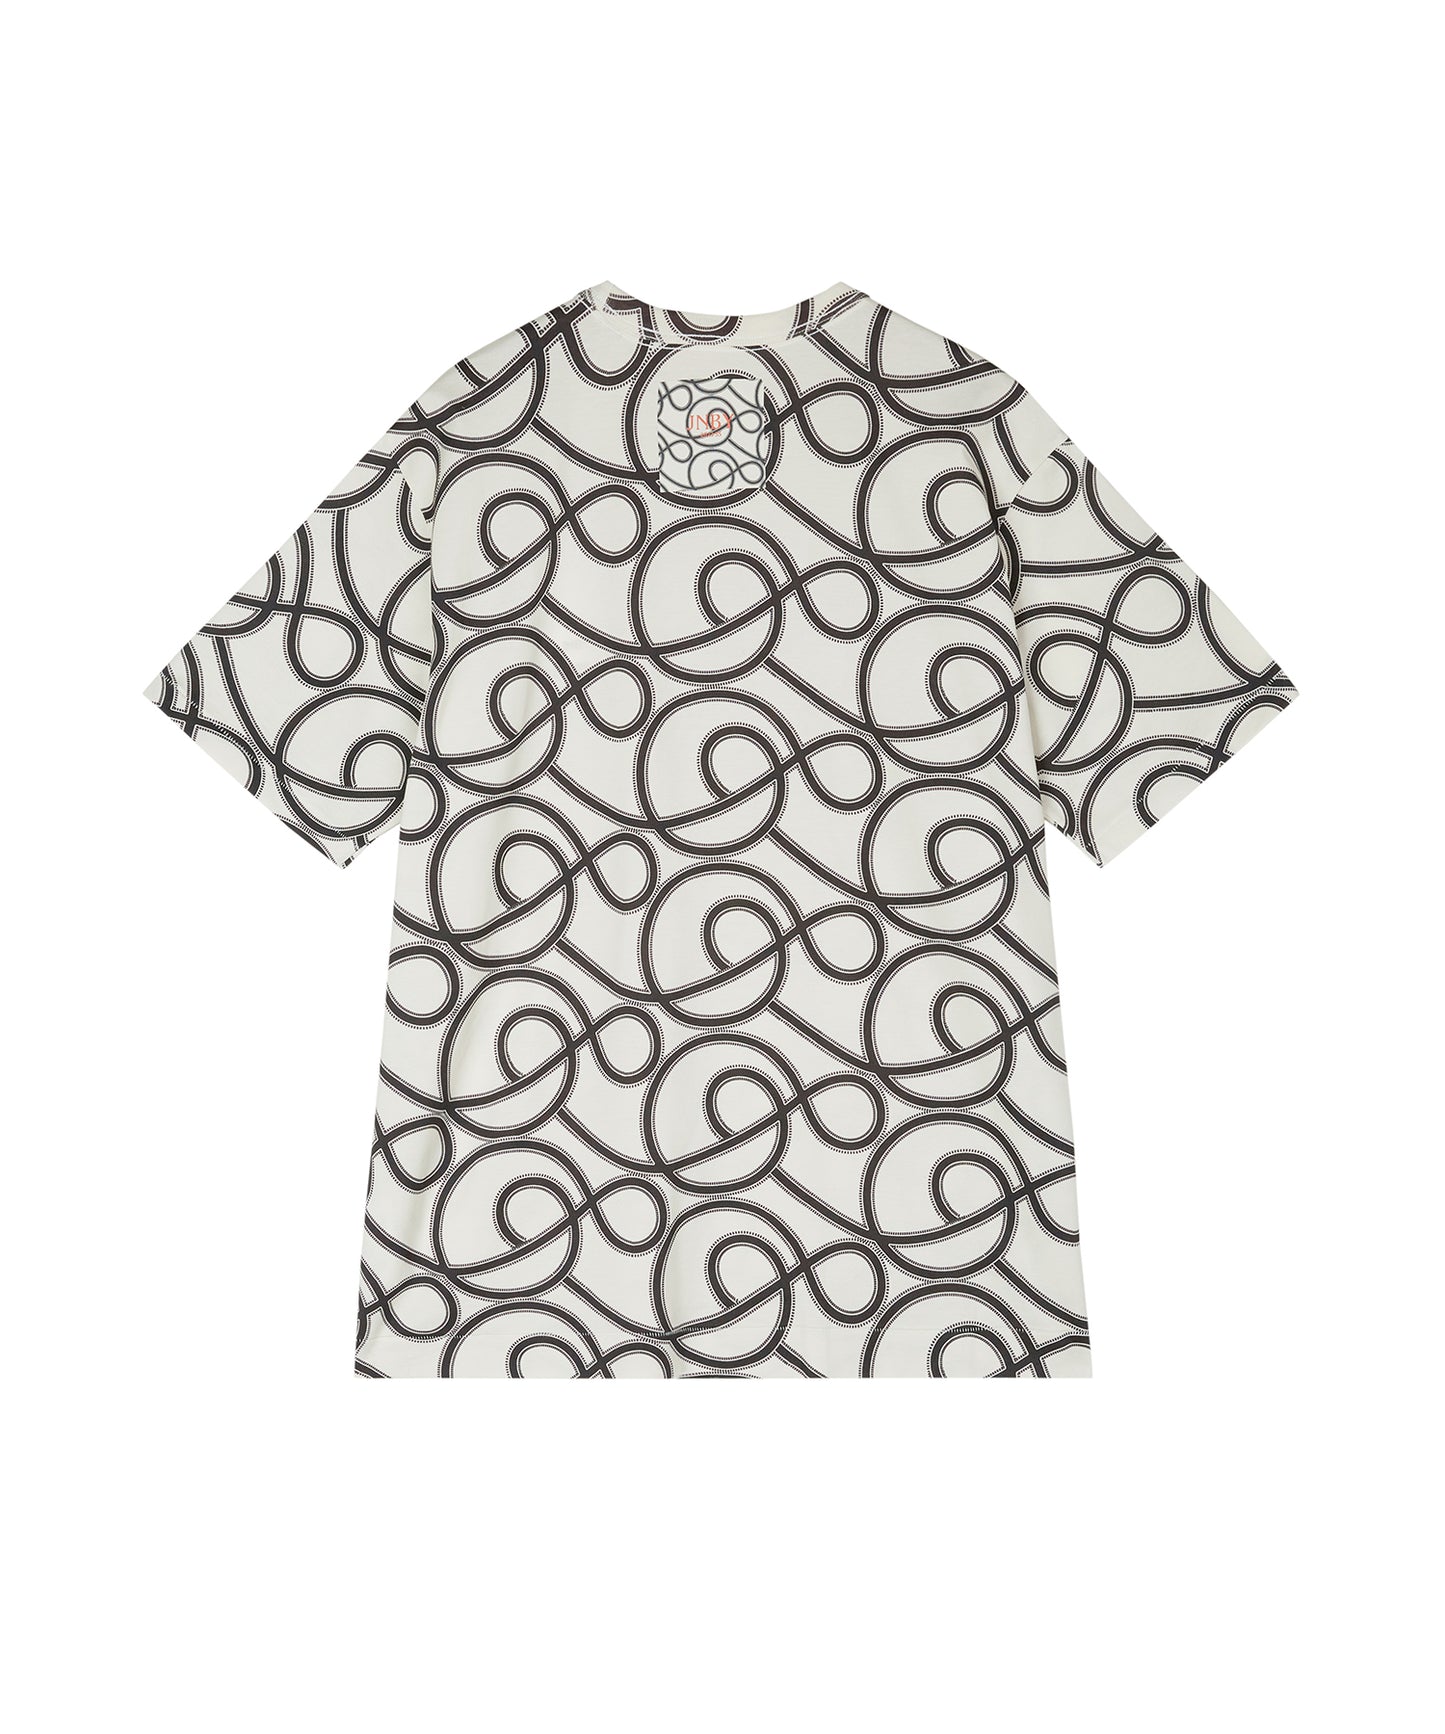 Enlarge Music Note Cotton T-shirt